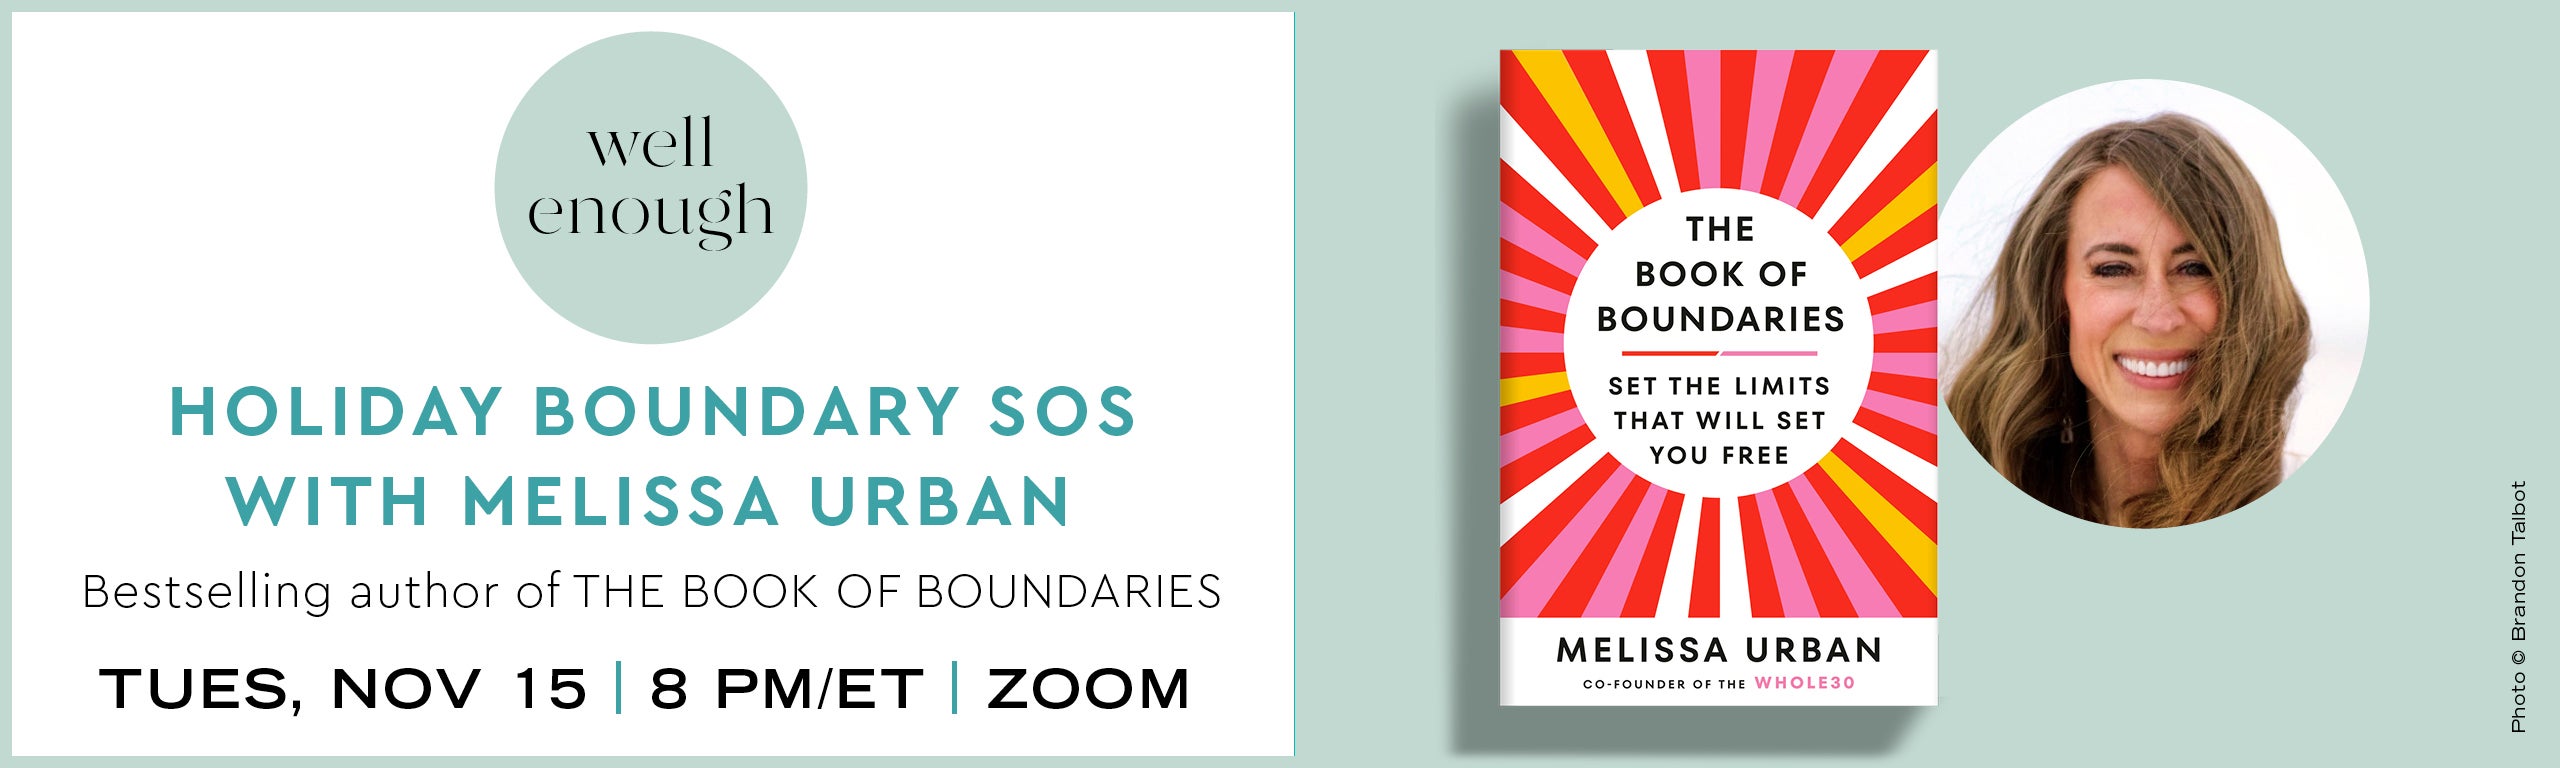 Well Enough: Holiday Boundary SOS with Melissa Urban